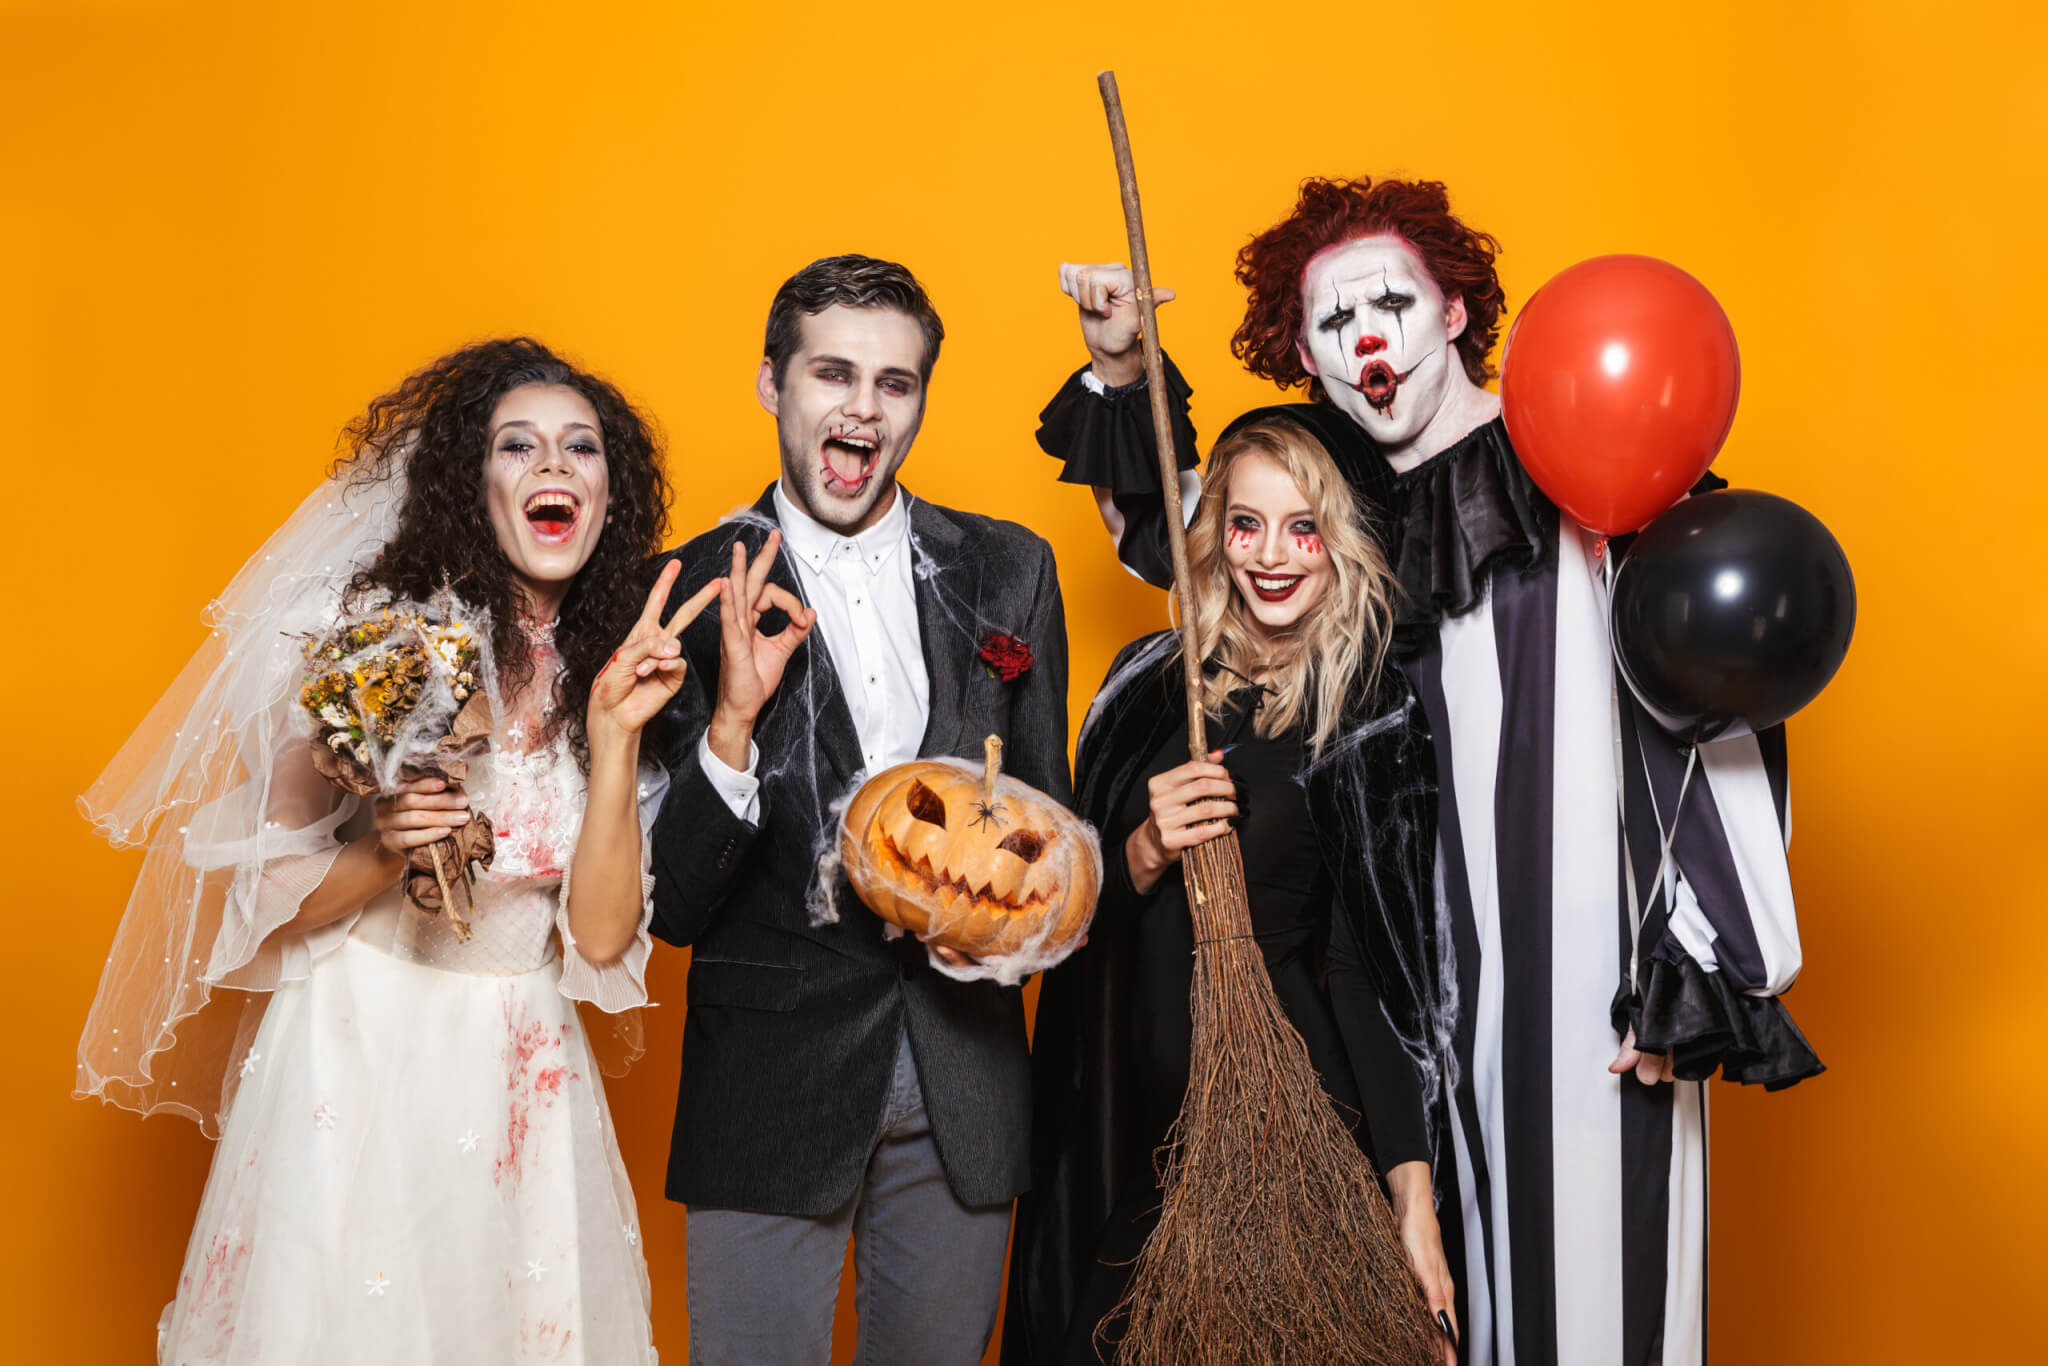 A group of people dressed in Halloween costumes